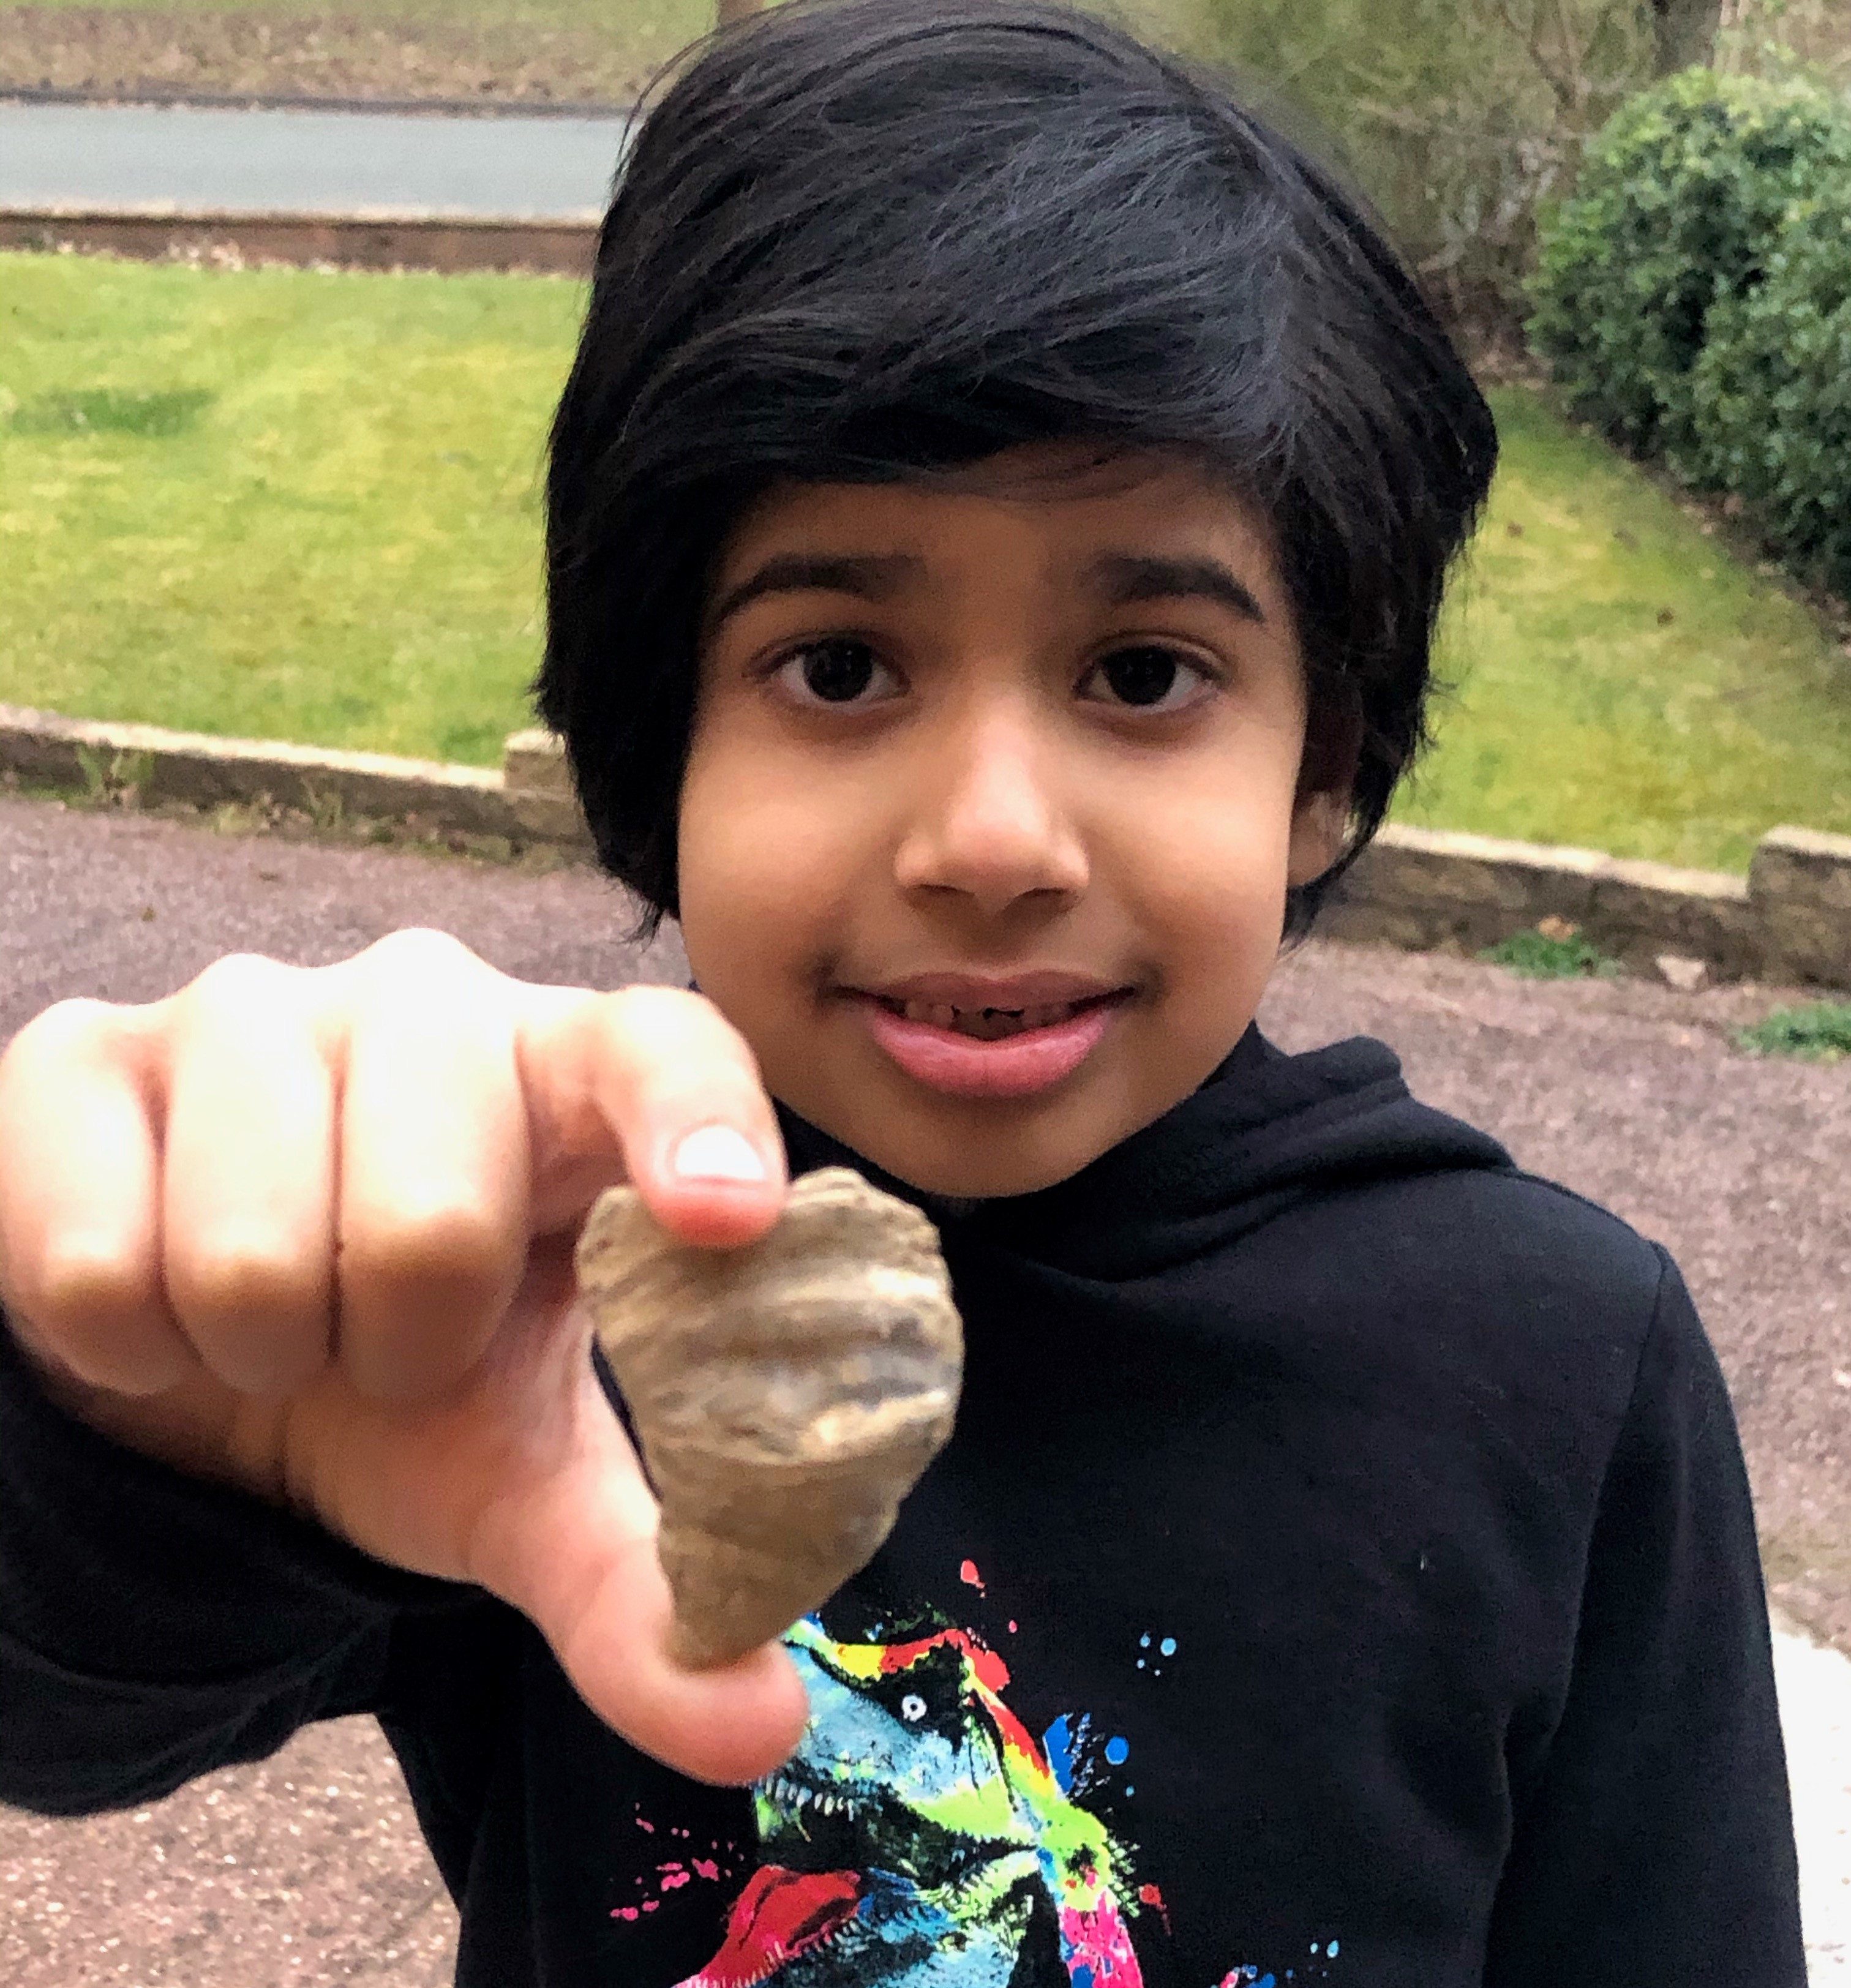 Six-year-old boy finds fossil in his garden